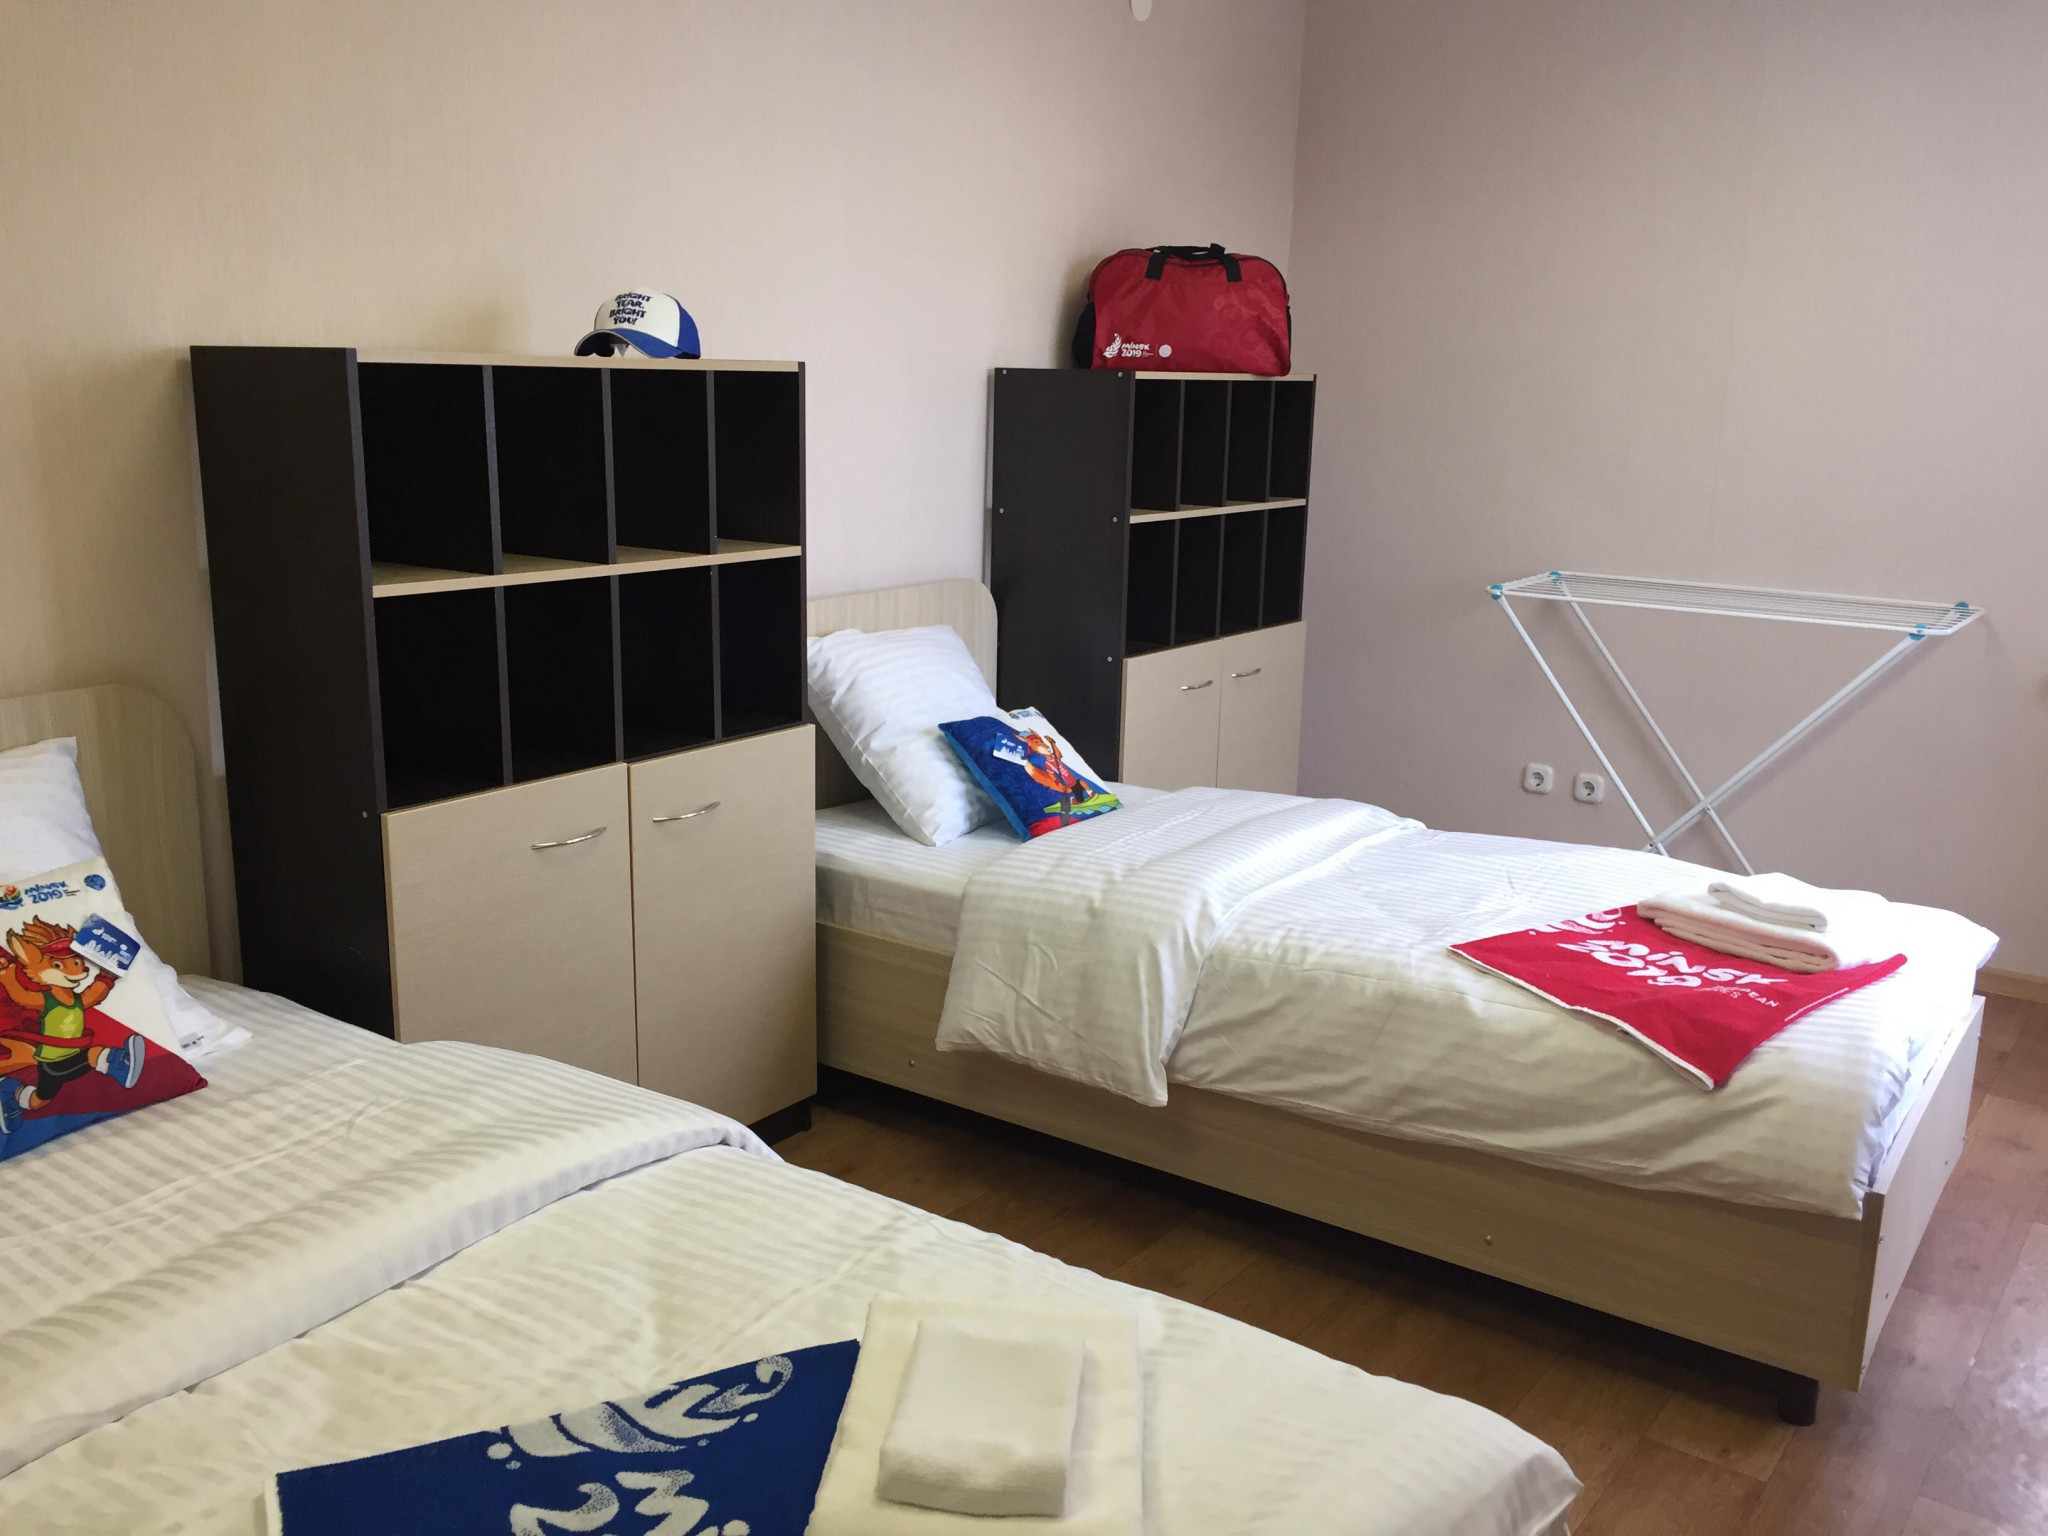 After Minsk 2019 the Athletes' Village will return to being a halls of residence for students of Medycynski University ©ITG